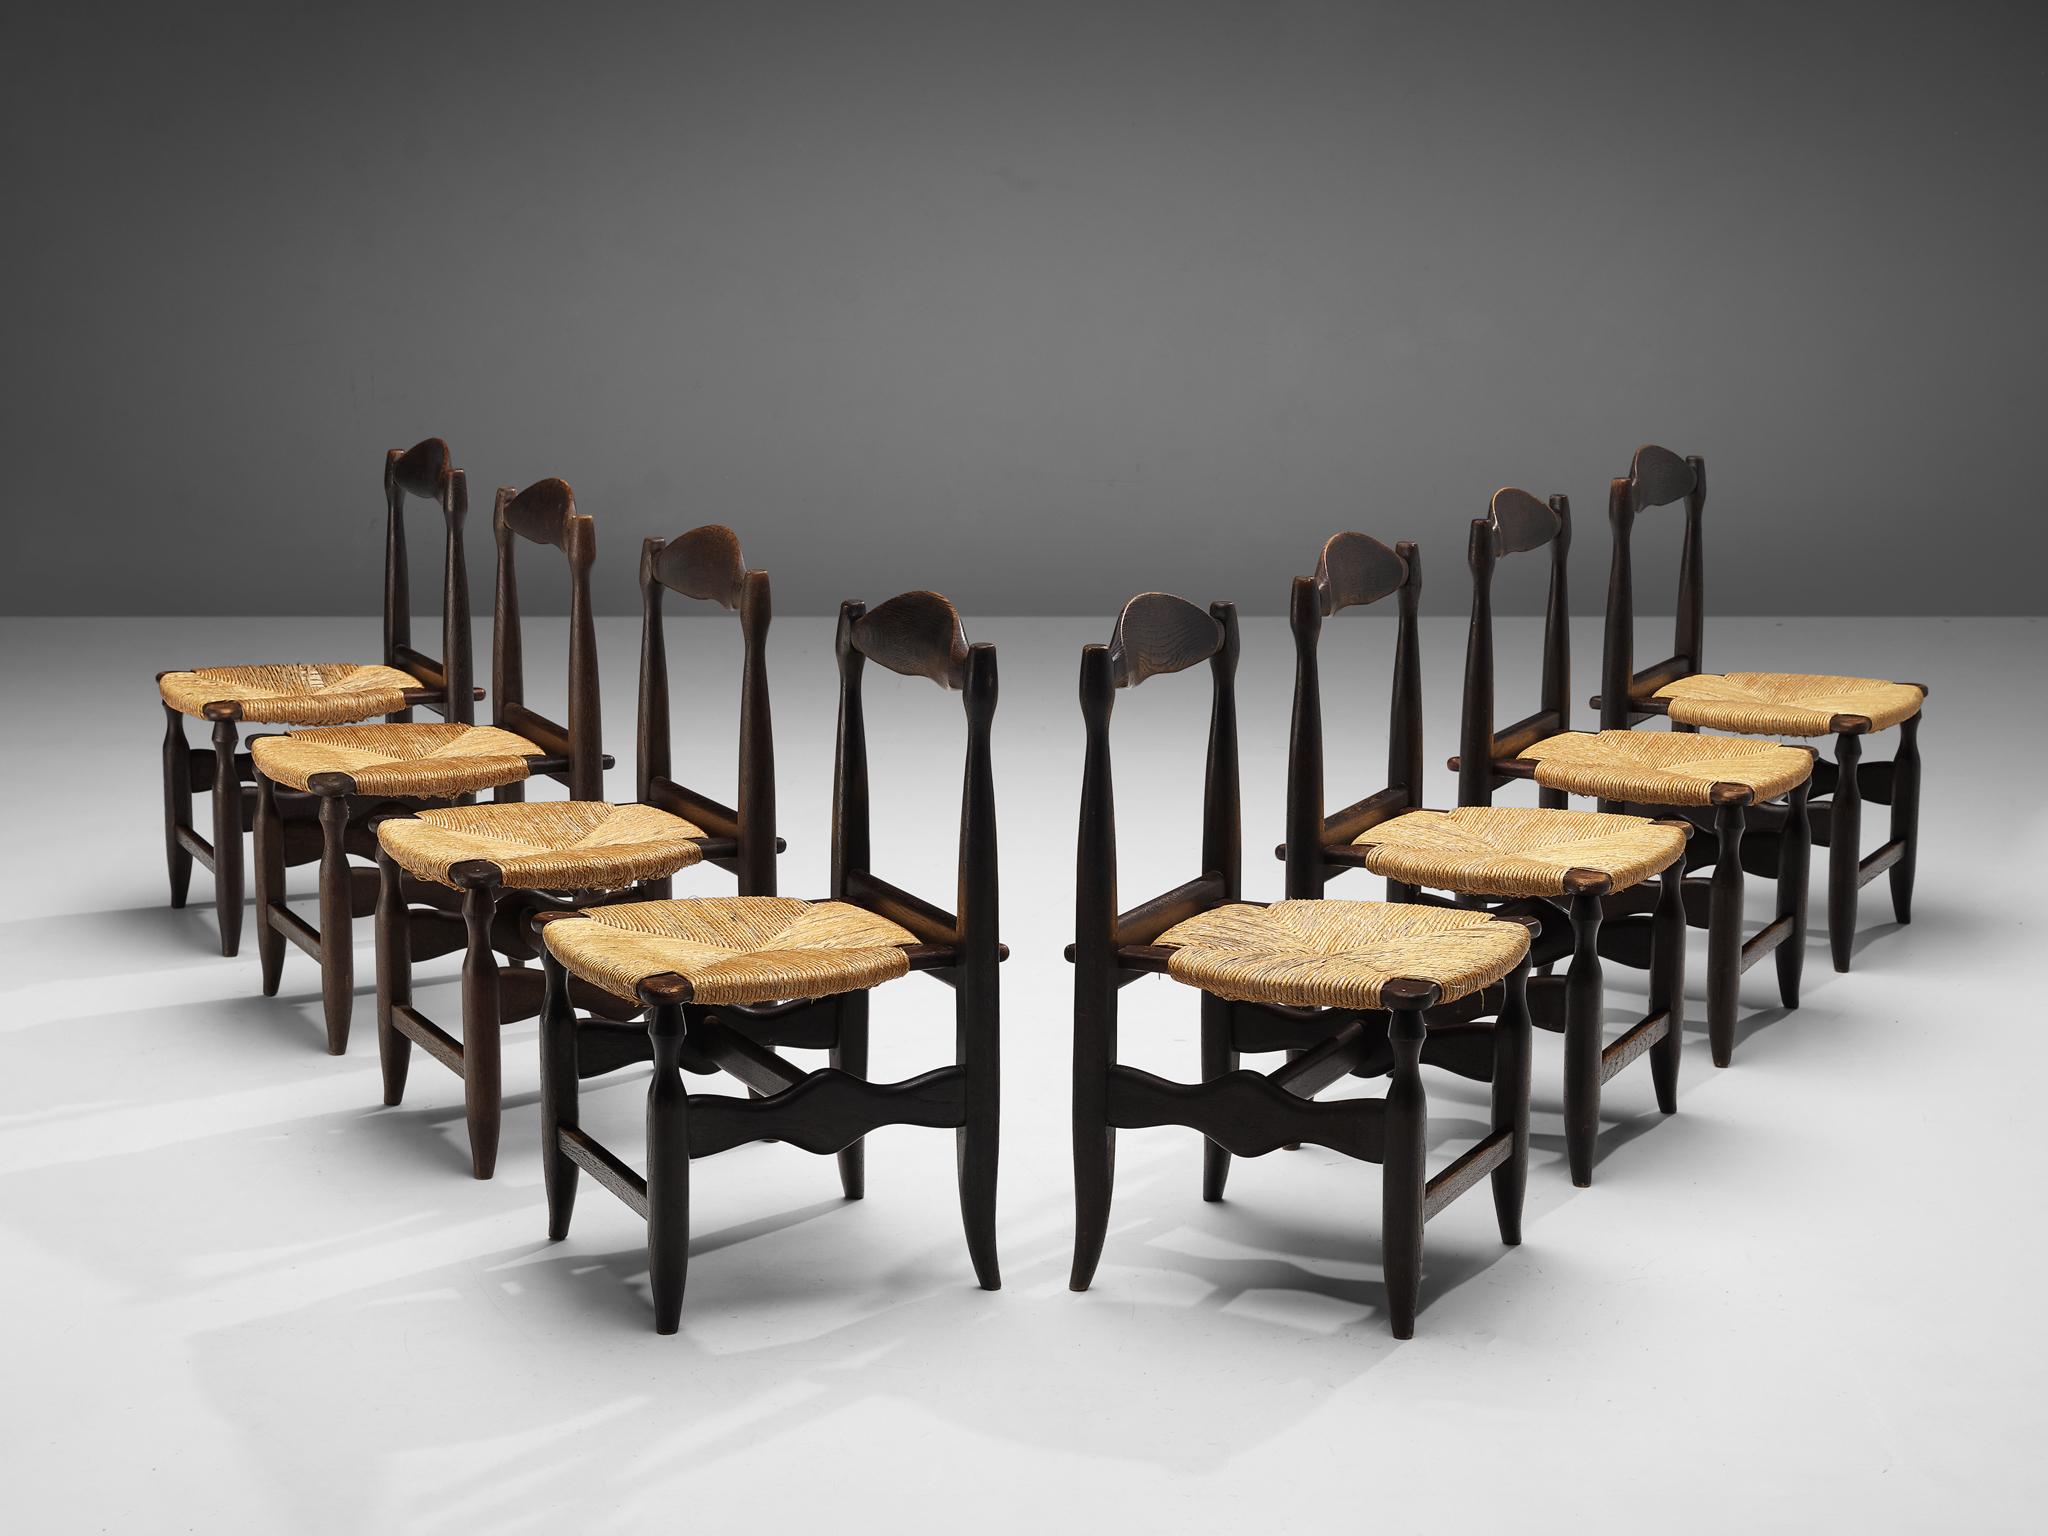 Guillerme & Chambron for Votre Maison, set of eight dining chairs, oak, rush, France, 1960s

Beautifully shaped chairs in patinated oak by French designer duo Jacques Chambron and Robert Guillerme. These dining chairs show beautiful lines in every